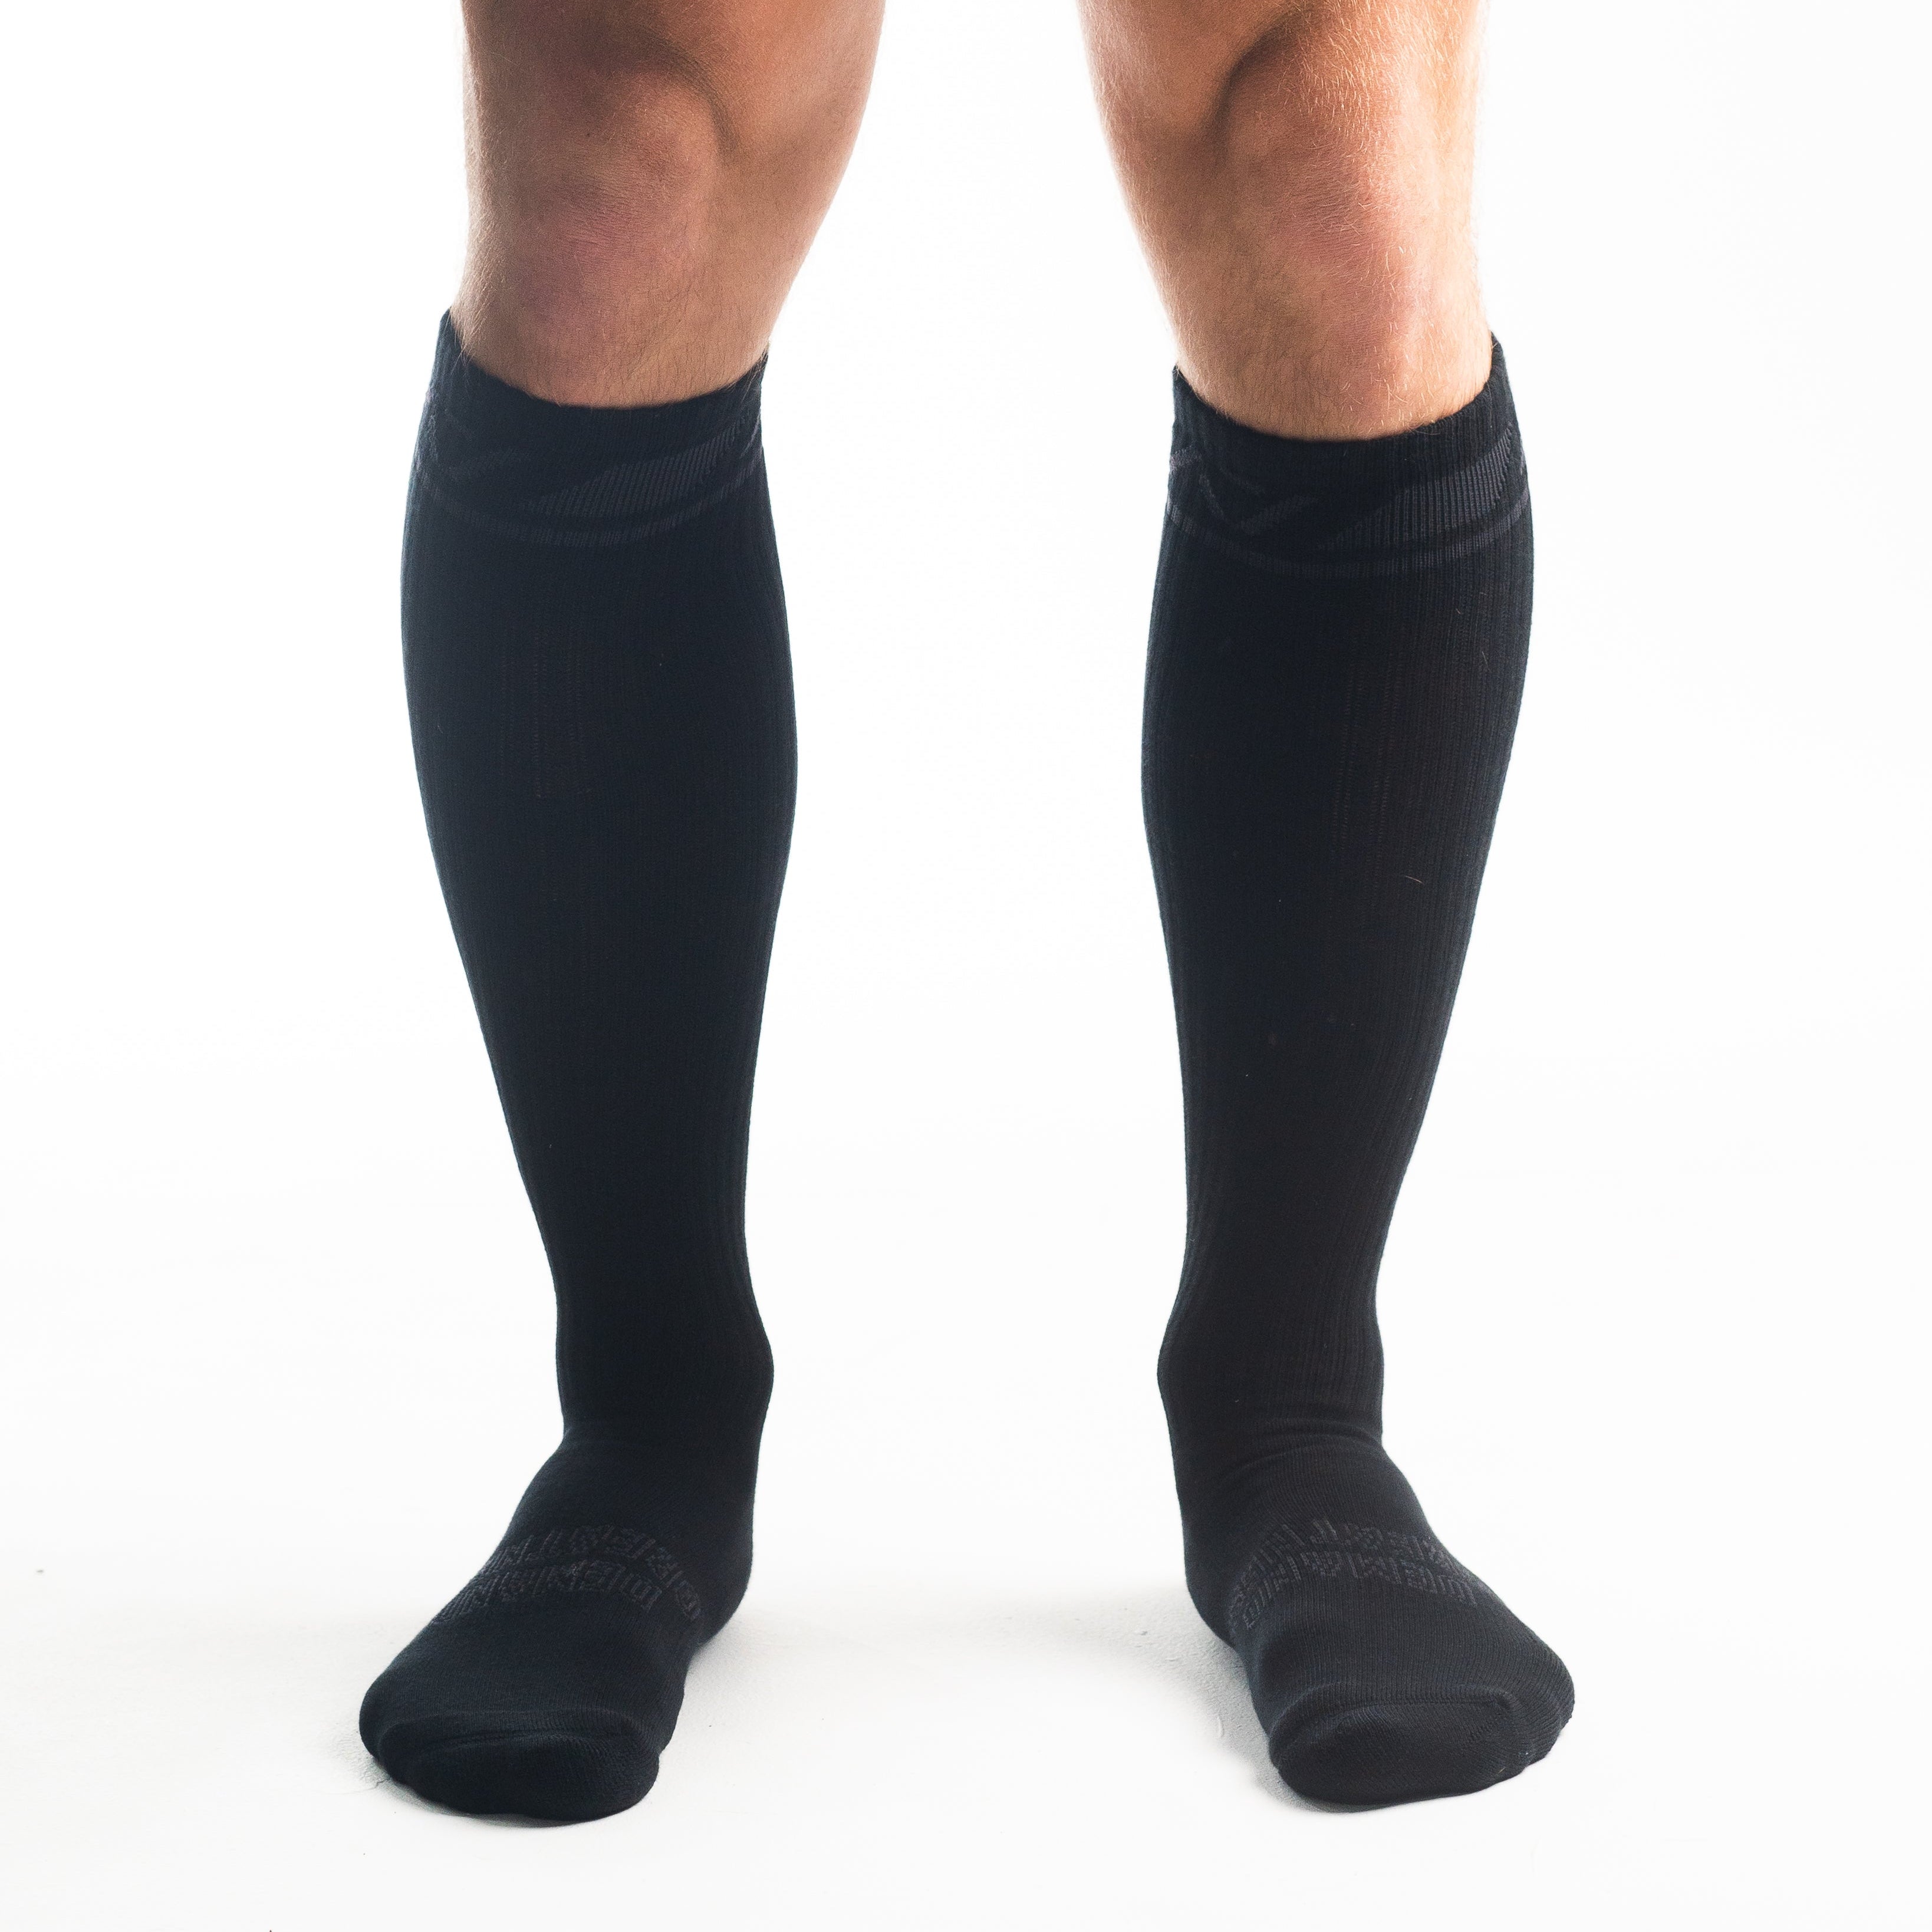 A7 Stealth Deadlift socks are designed specifically for pulls and keep your shins protected from scrapes. A7 deadlift socks are a perfect pair to wear in training or powerlifting competition. The IPF Approved Kit includes Powerlifting Singlet, A7 Meet Shirt, A7 Zebra Wrist Wraps, A7 Deadlift Socks, Hourglass Knee Sleeves (Stiff Knee Sleeves and Rigor Mortis Knee Sleeves). Genouillères powerlifting shipping to France, Spain, Ireland, Germany, Italy, Sweden and EU.